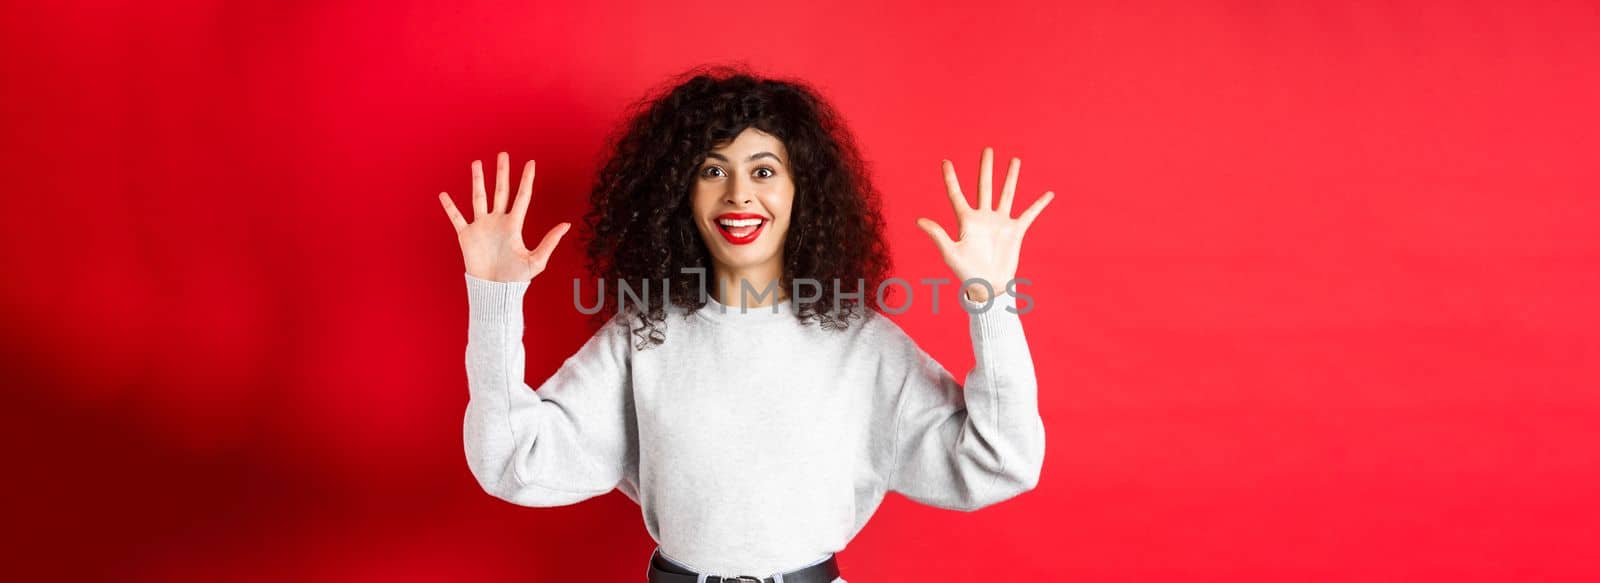 Happy beautiful woman smiling and raising hands up, showing number ten, ordern dozen of something, standing in sweatshirt on red background.